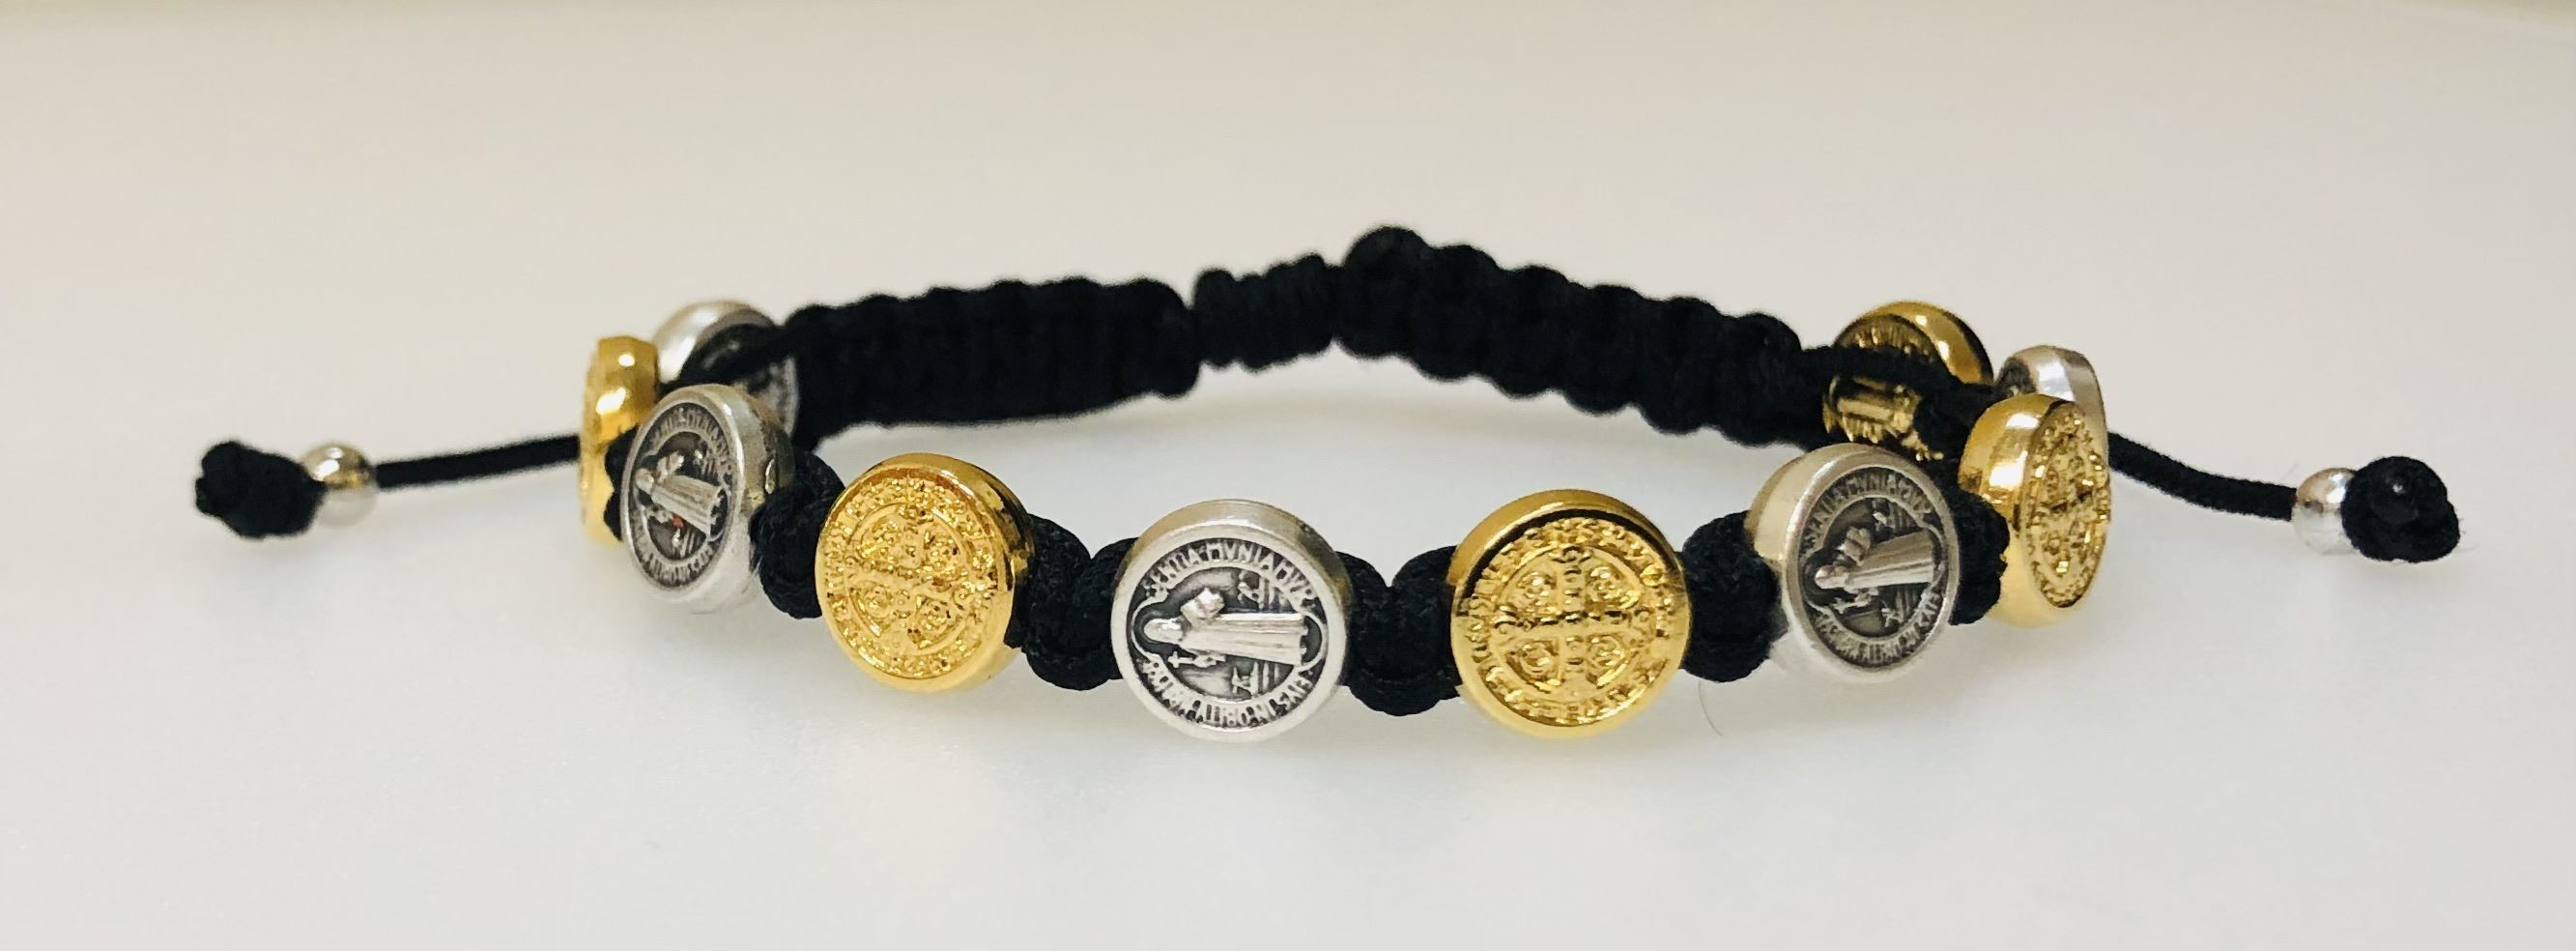 Black Benedictine Blessing Bracelet with Mixed Medals